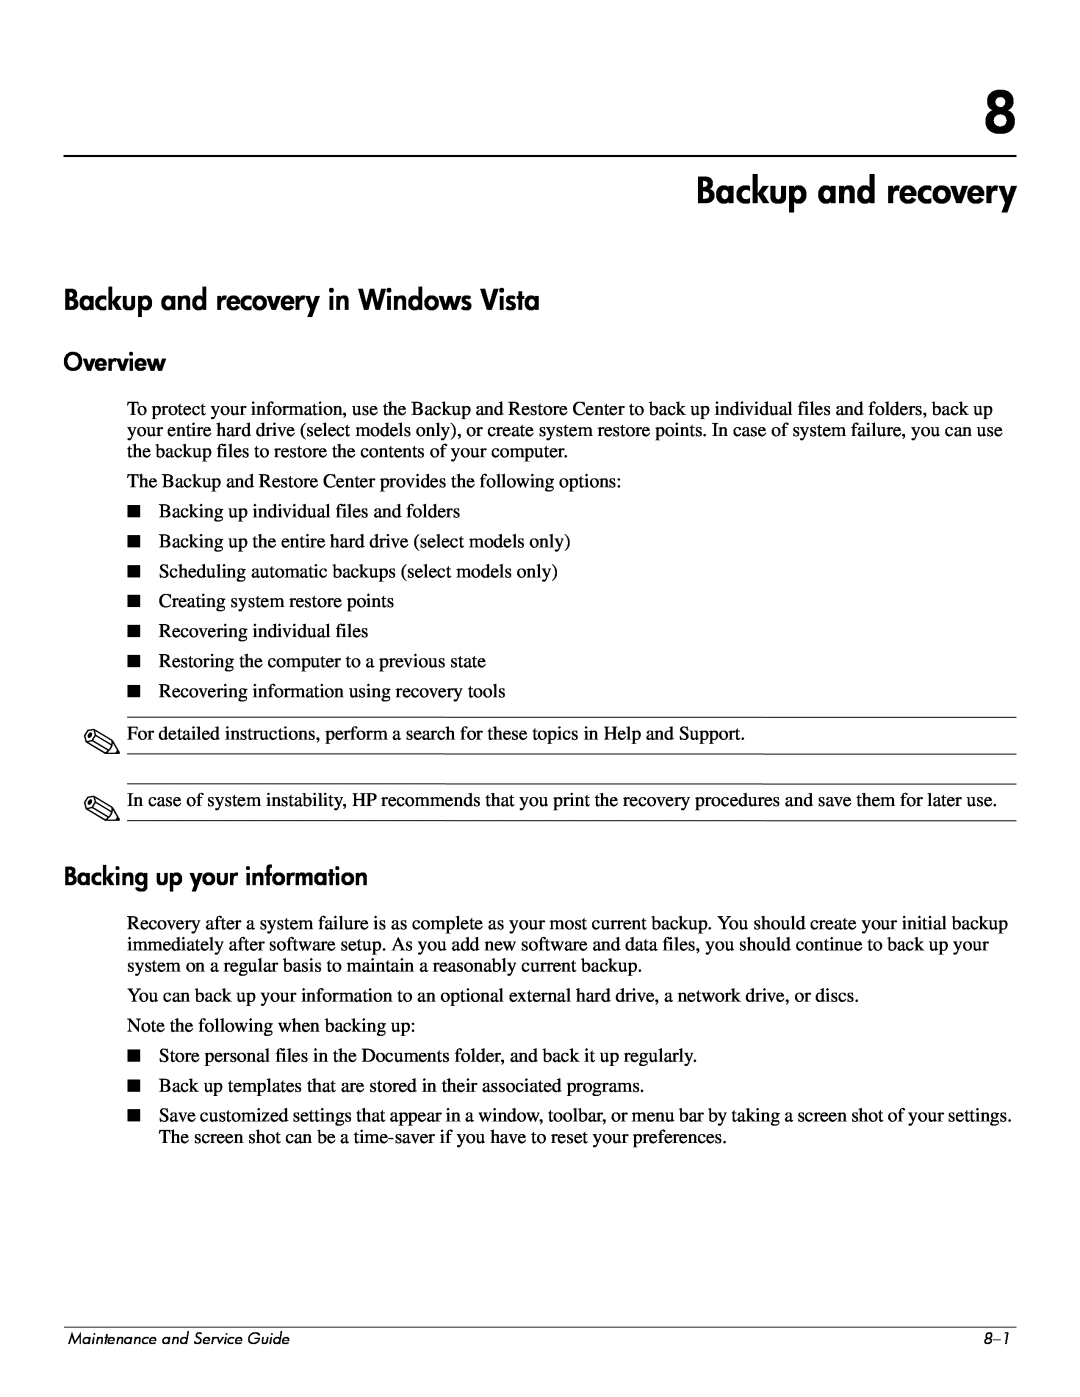 Hitachi 2730P manual Backup and recovery in Windows Vista, Overview, Backing up your information 